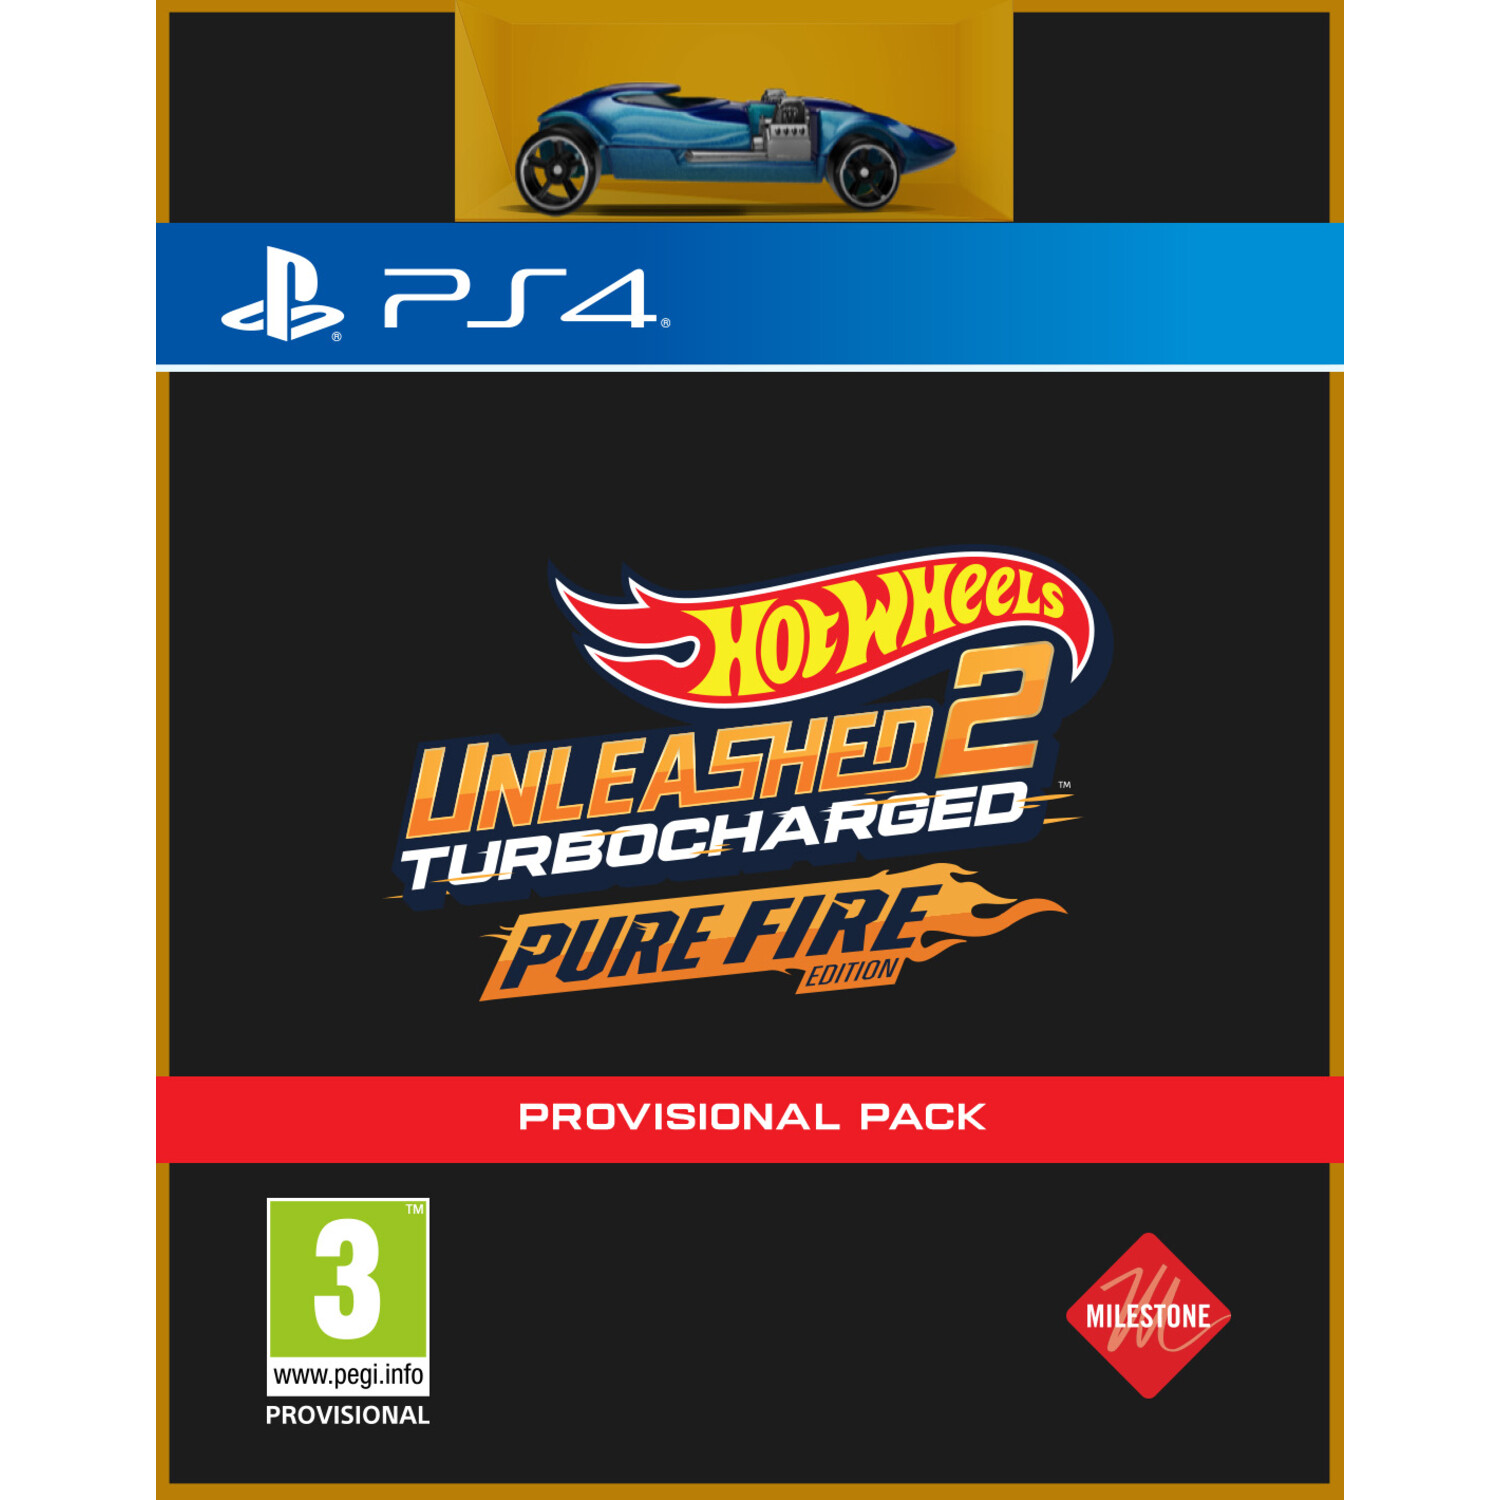 Turbocharged PS4 Wheels Pure Edition - Unleashed Fire 2: Hot